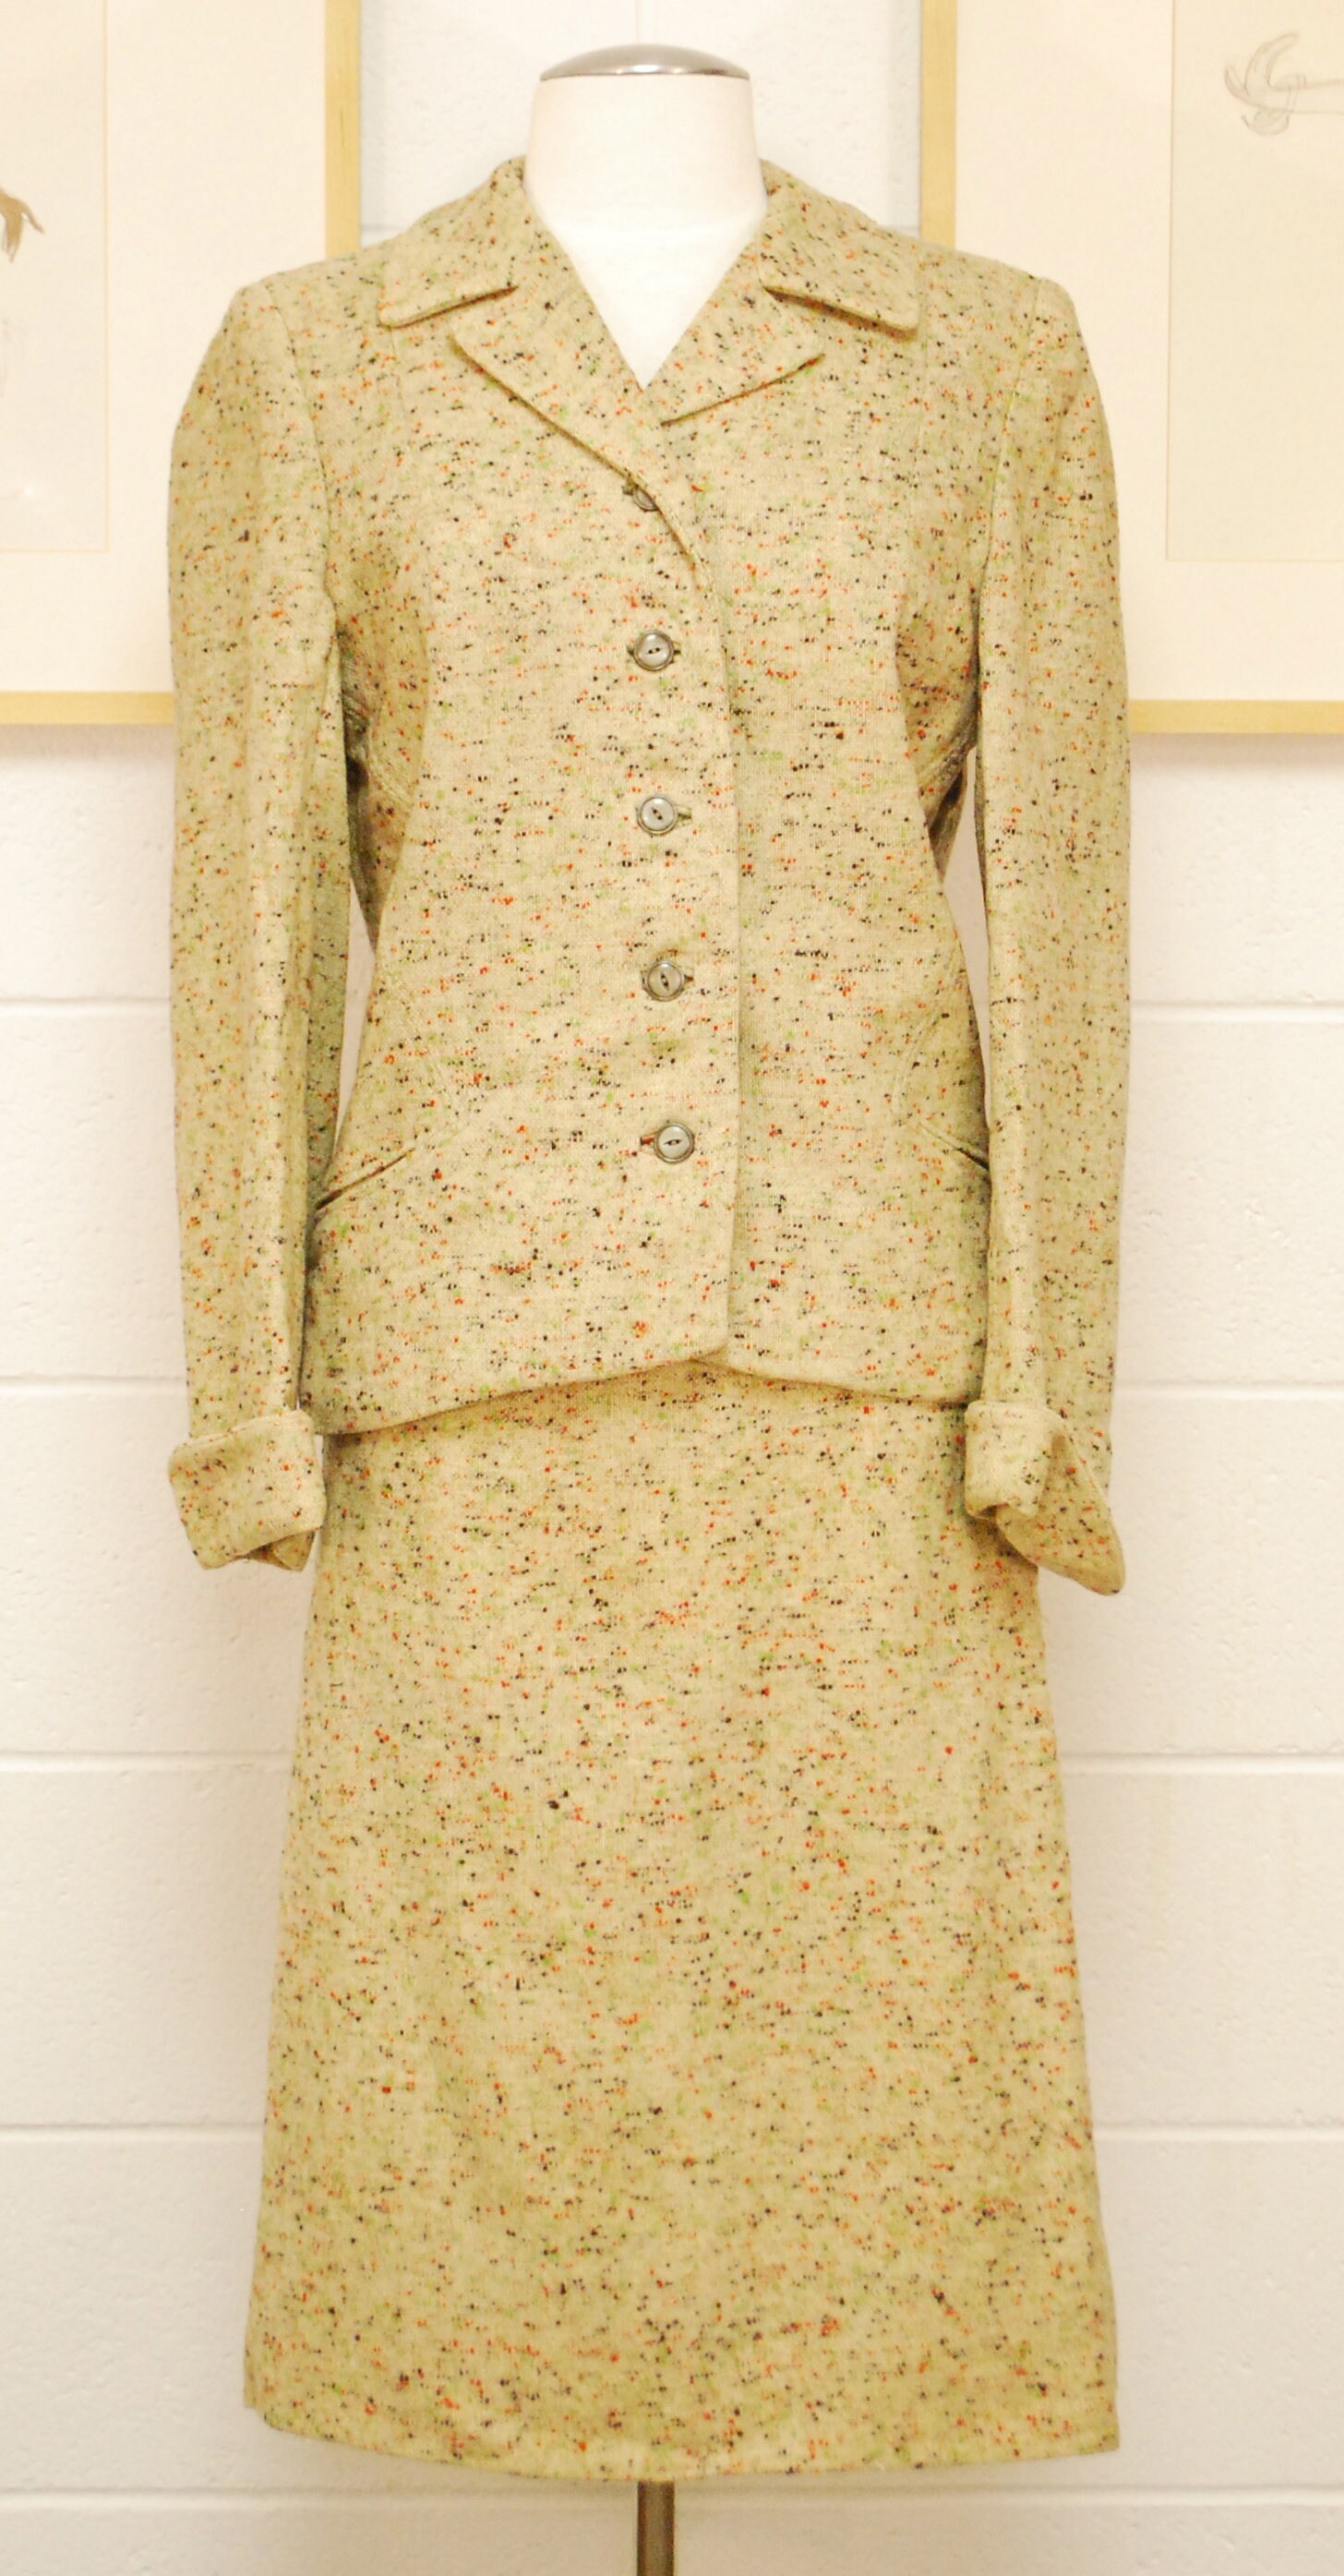 1940's/50's Tan Speckled Wool Tweed Jacket and Skirt - Etsy